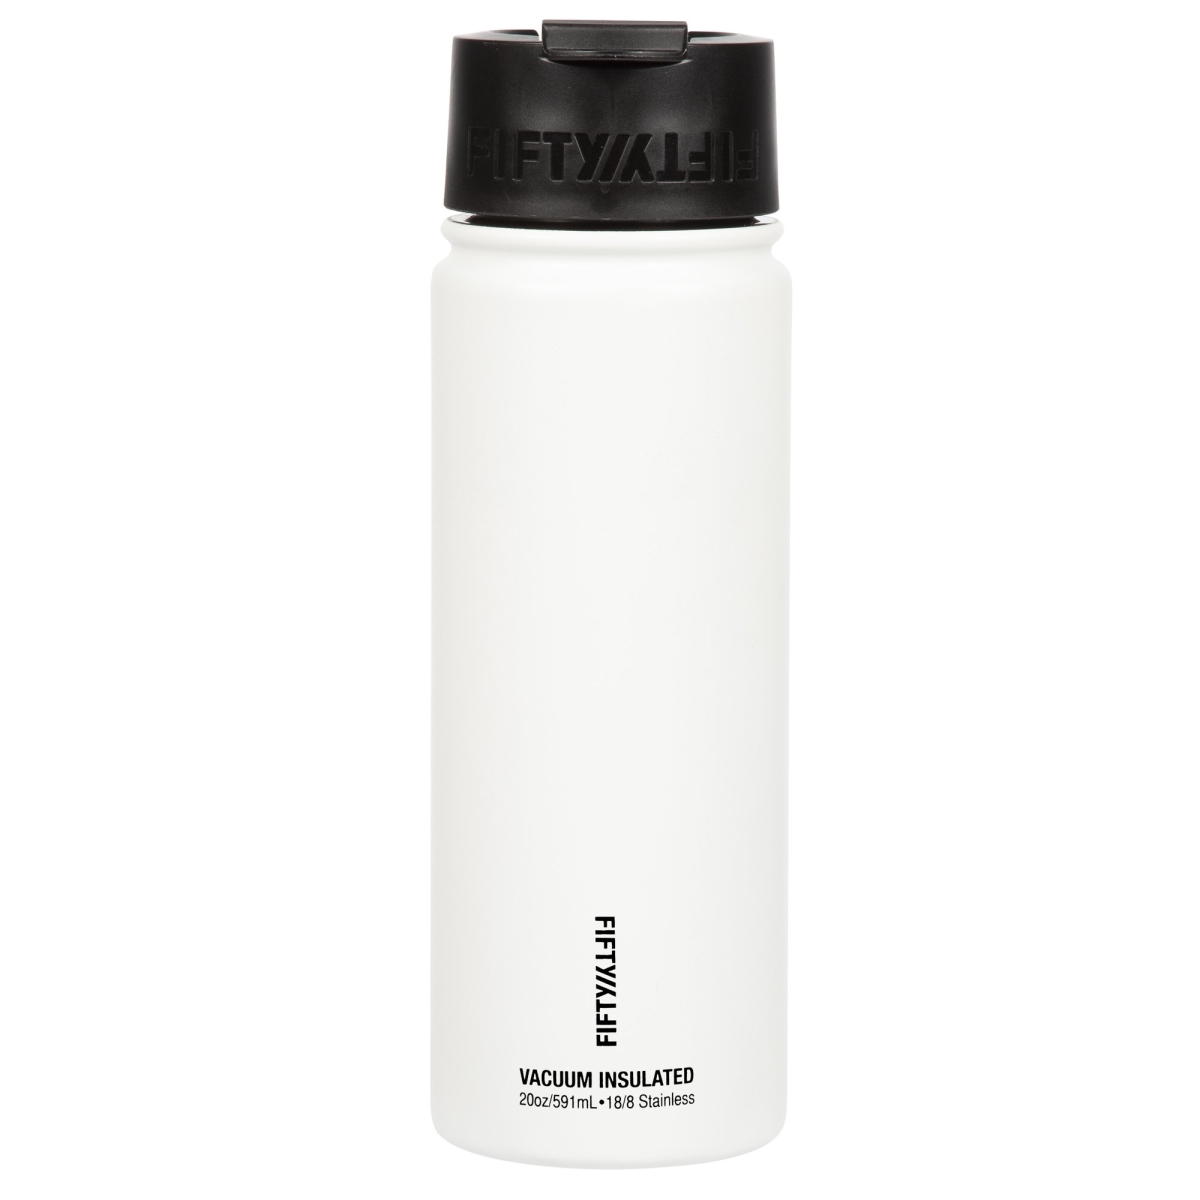 V20005wh0 20 Oz Double-wall Vacuum-insulated Bottles With Flip Cap, Winter White